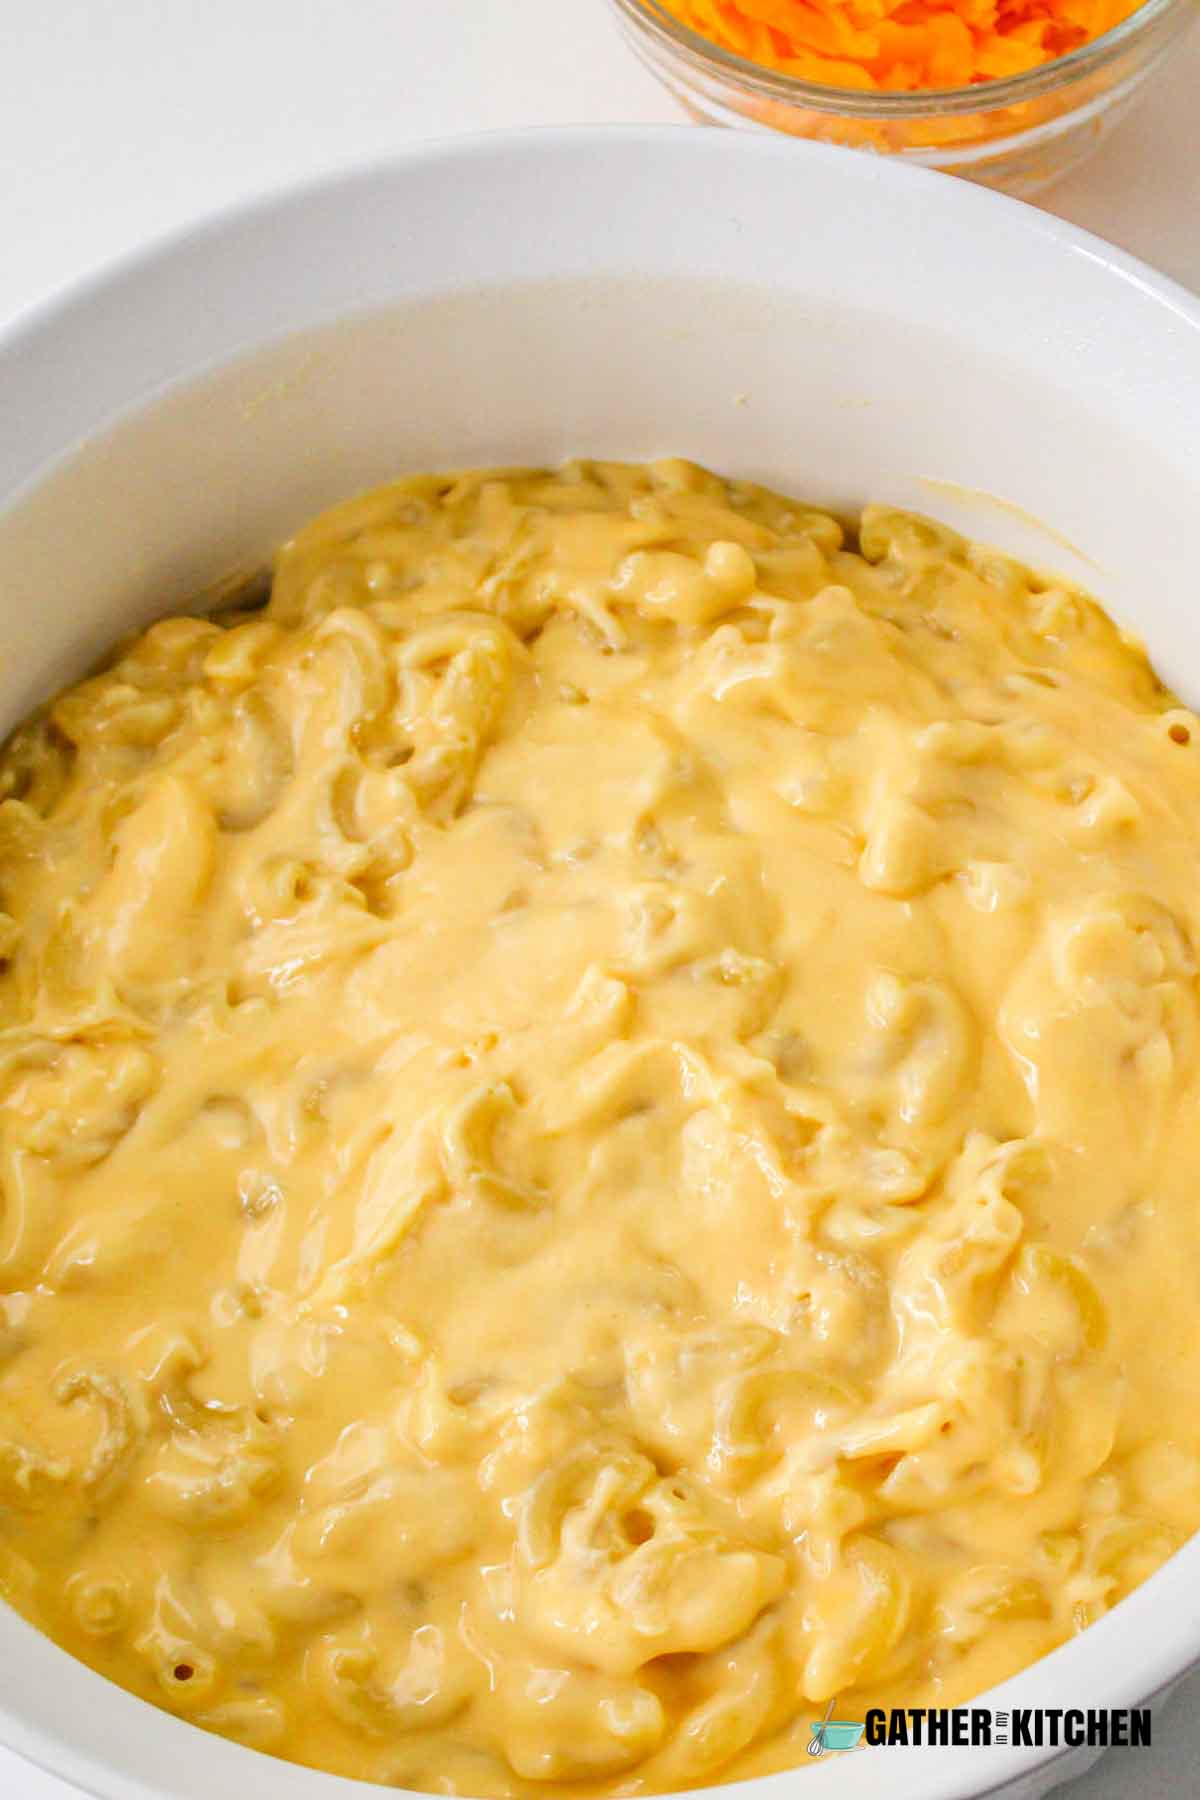 Cheese sauce over cooked macaroni.